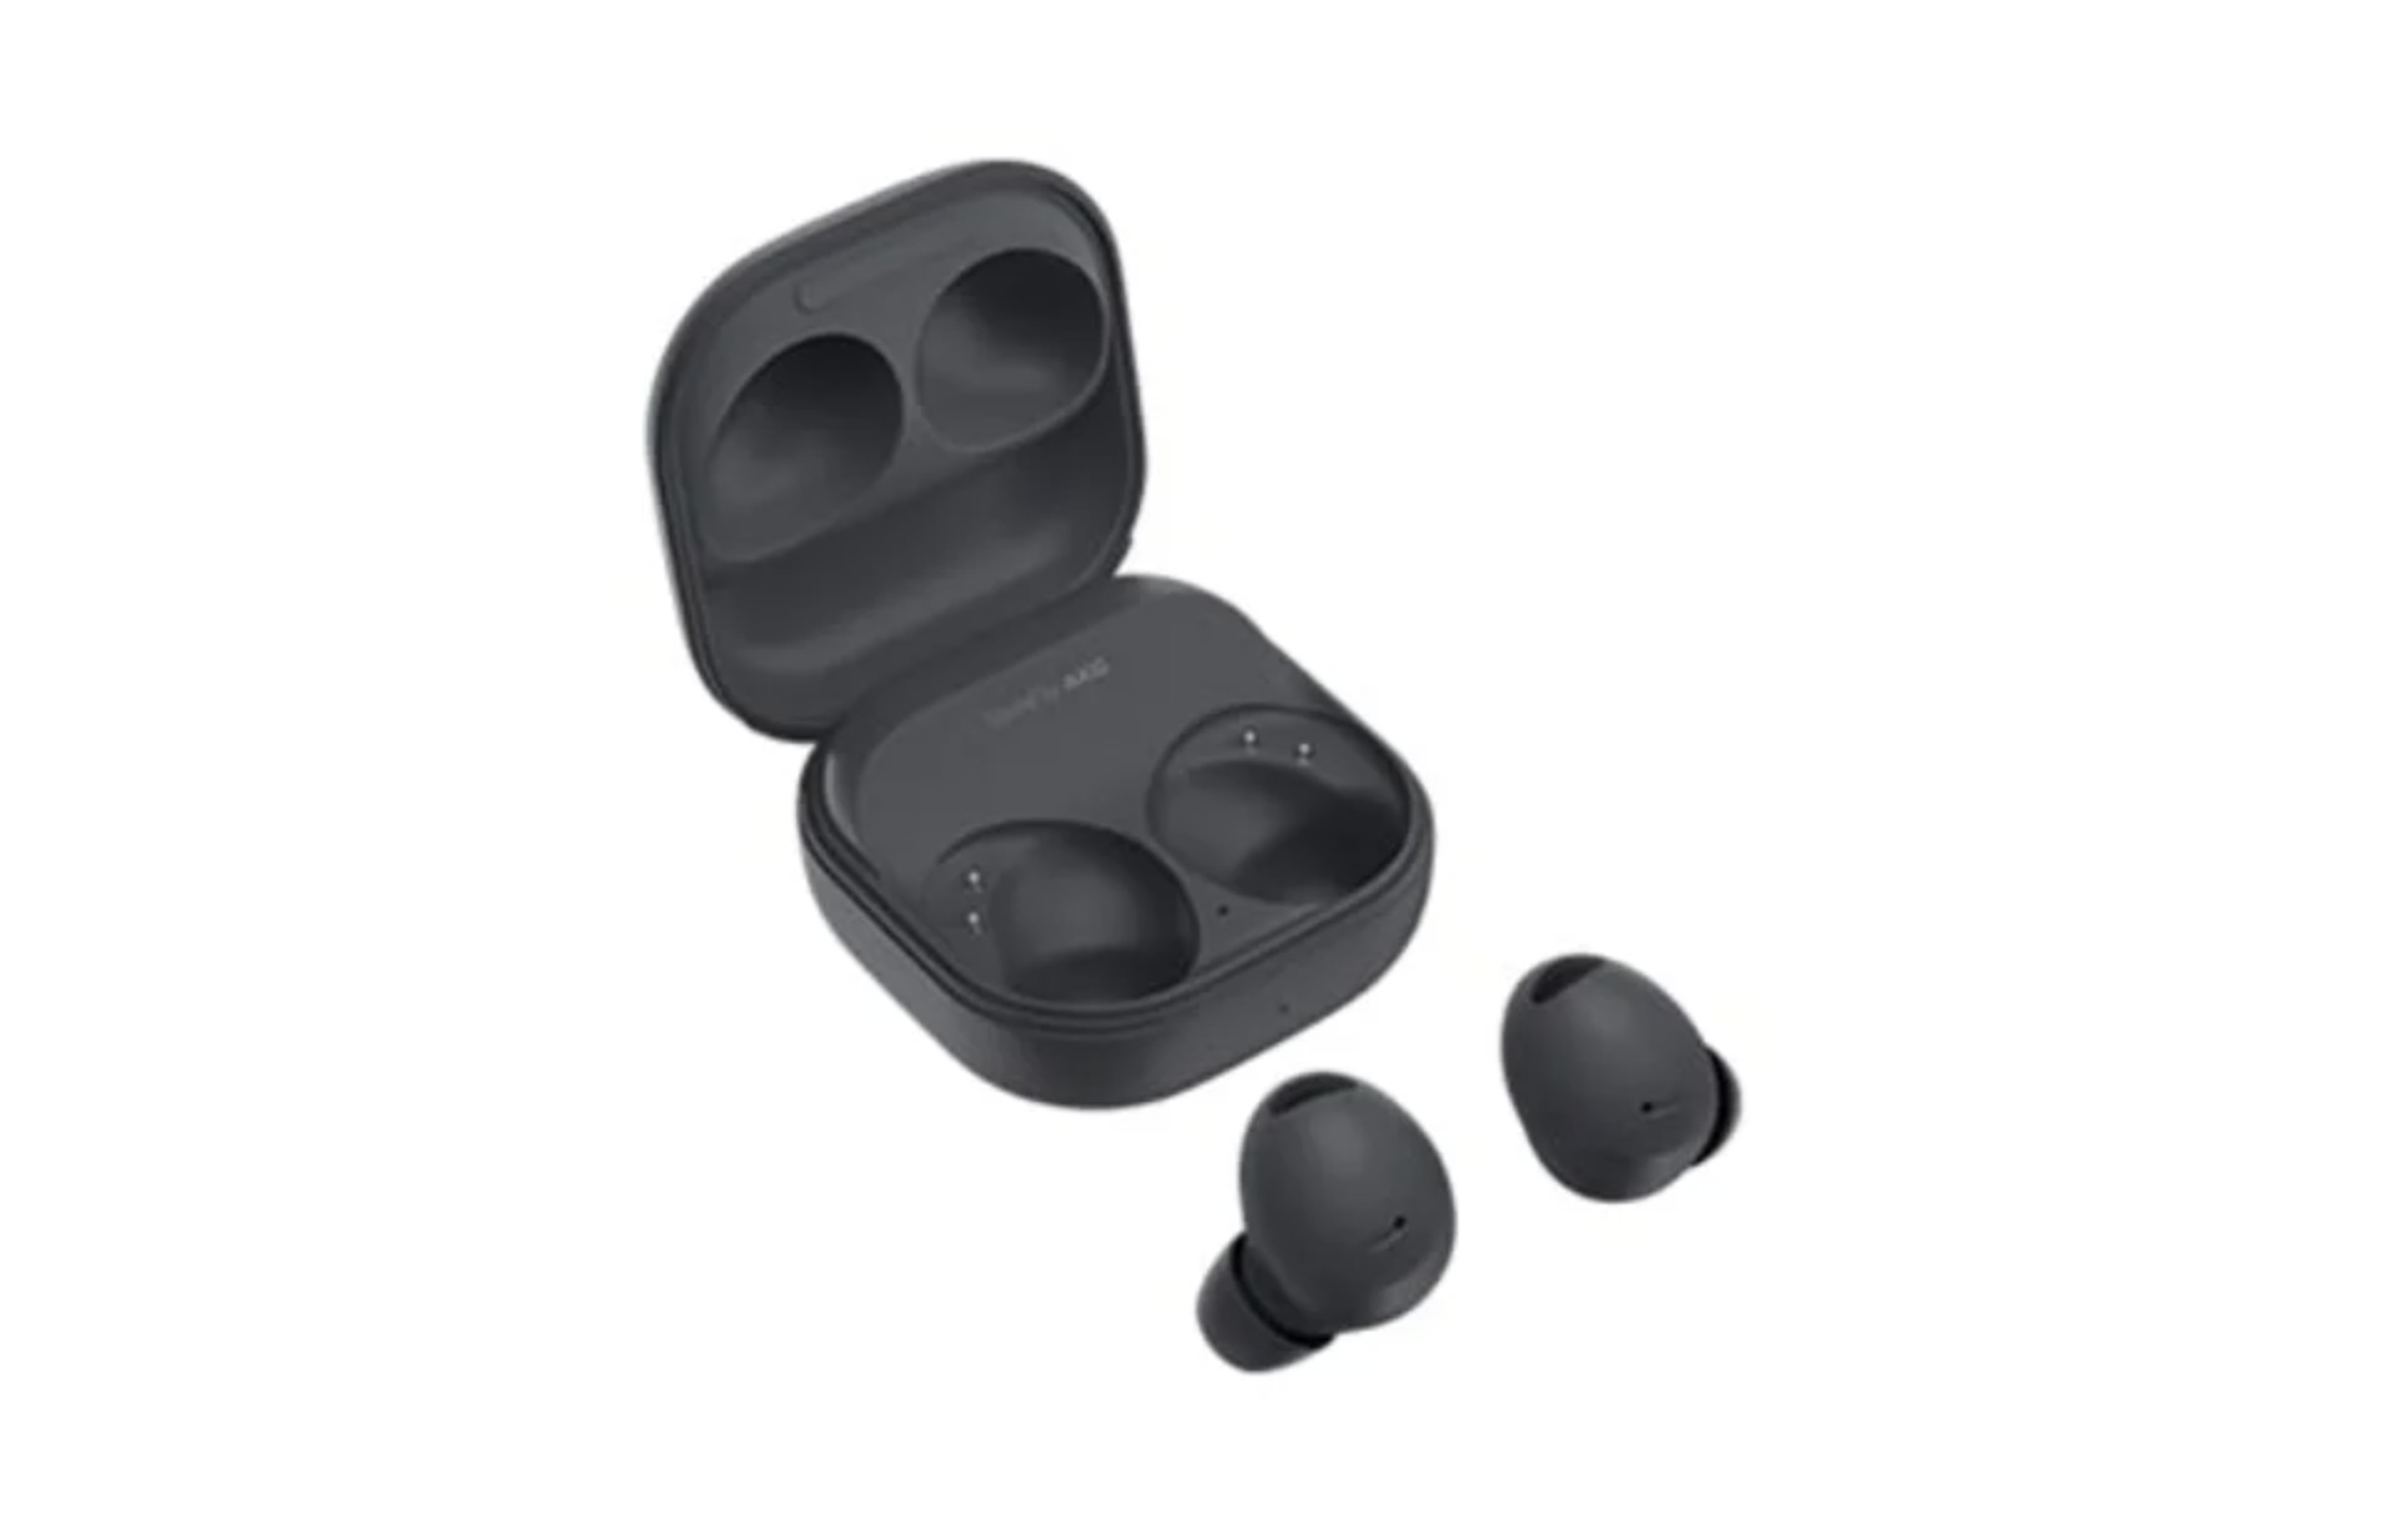 Leaked images purportedly showing the Galaxy Buds Pro 2. 